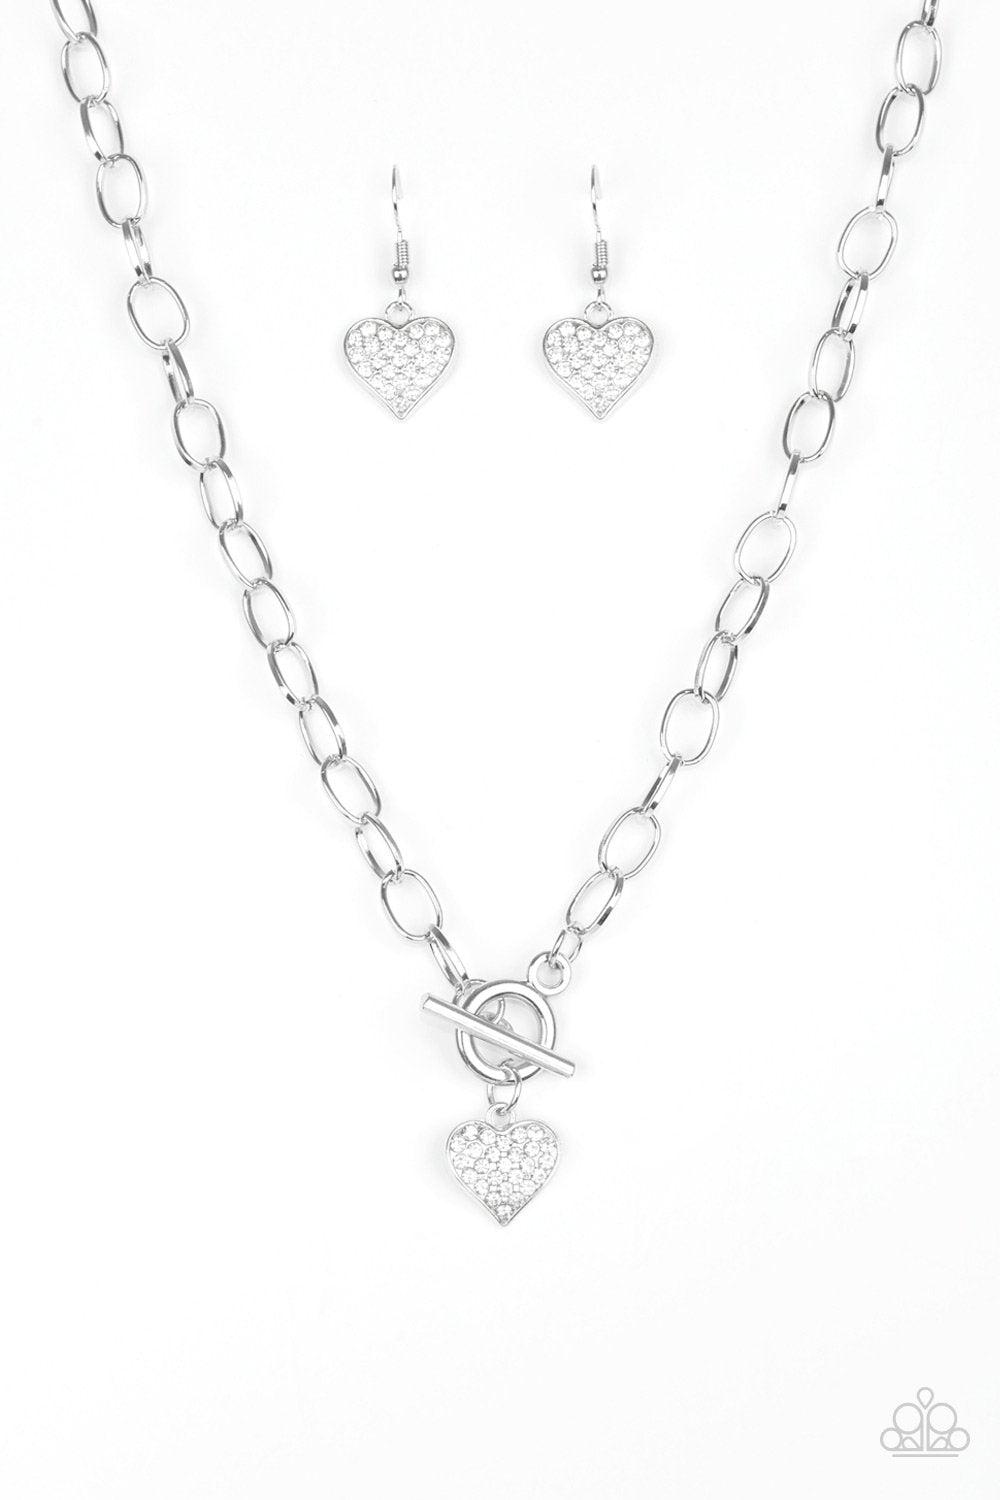 Harvard Hearts Silver and White Rhinestone Heart Necklace - Paparazzi Accessories-CarasShop.com - $5 Jewelry by Cara Jewels